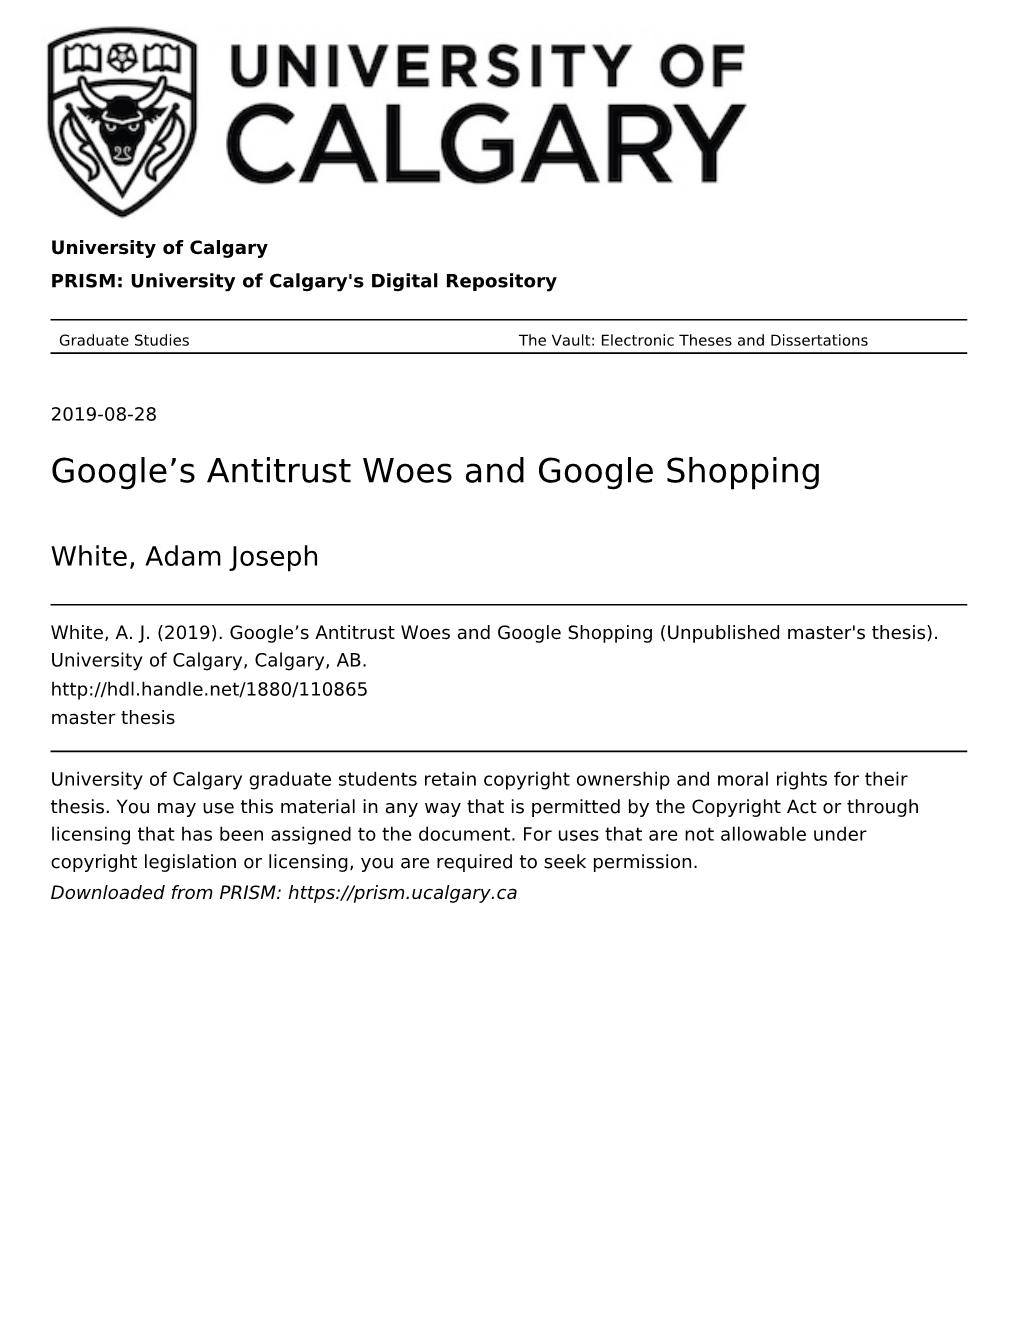 Google's Antitrust Woes and Google Shopping